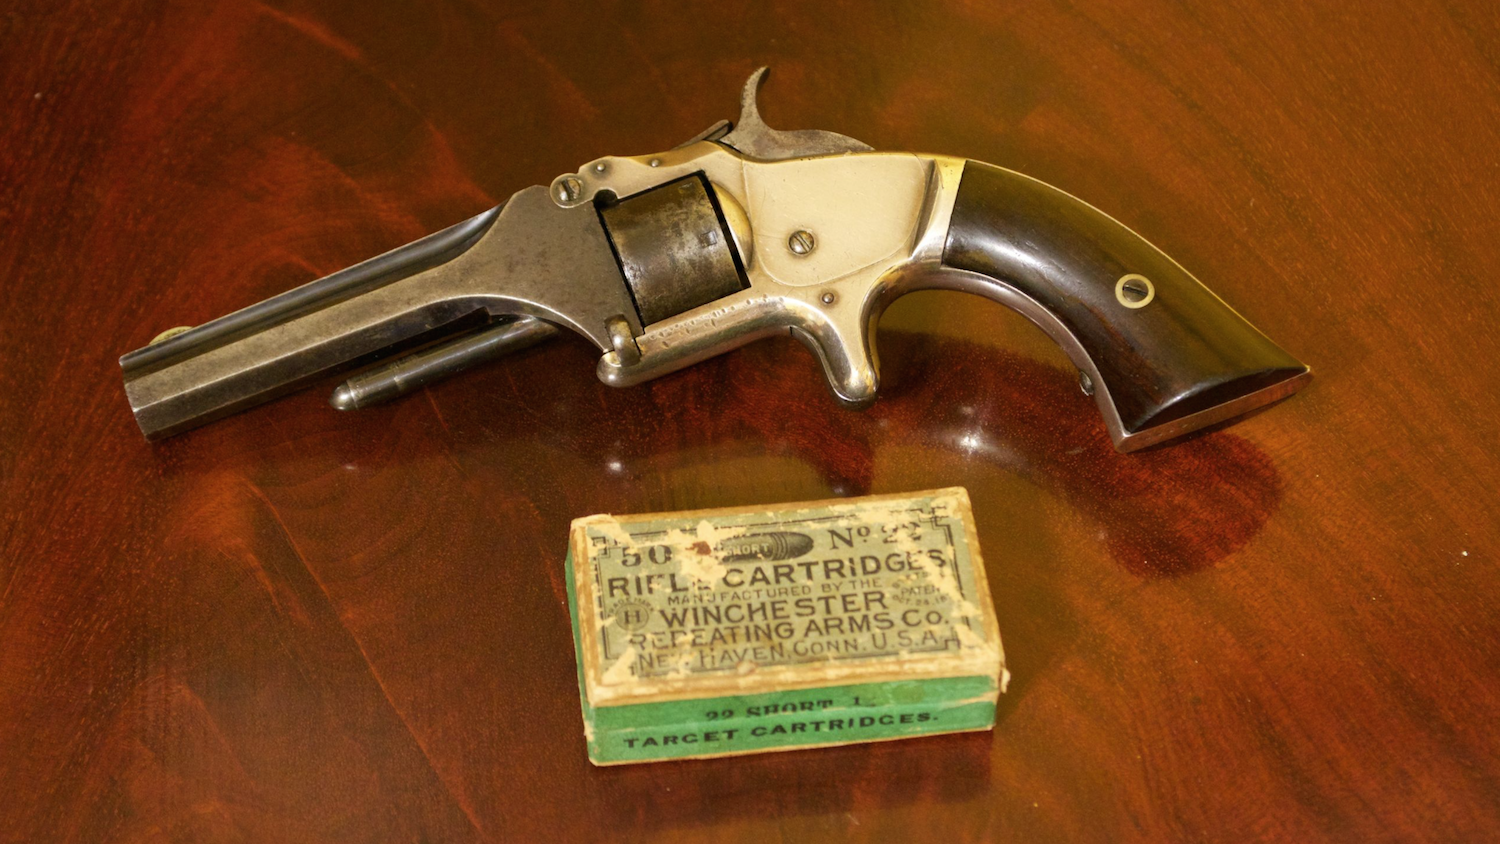 The Smith & Wesson Model Number One: Birth of .22 Rimfire